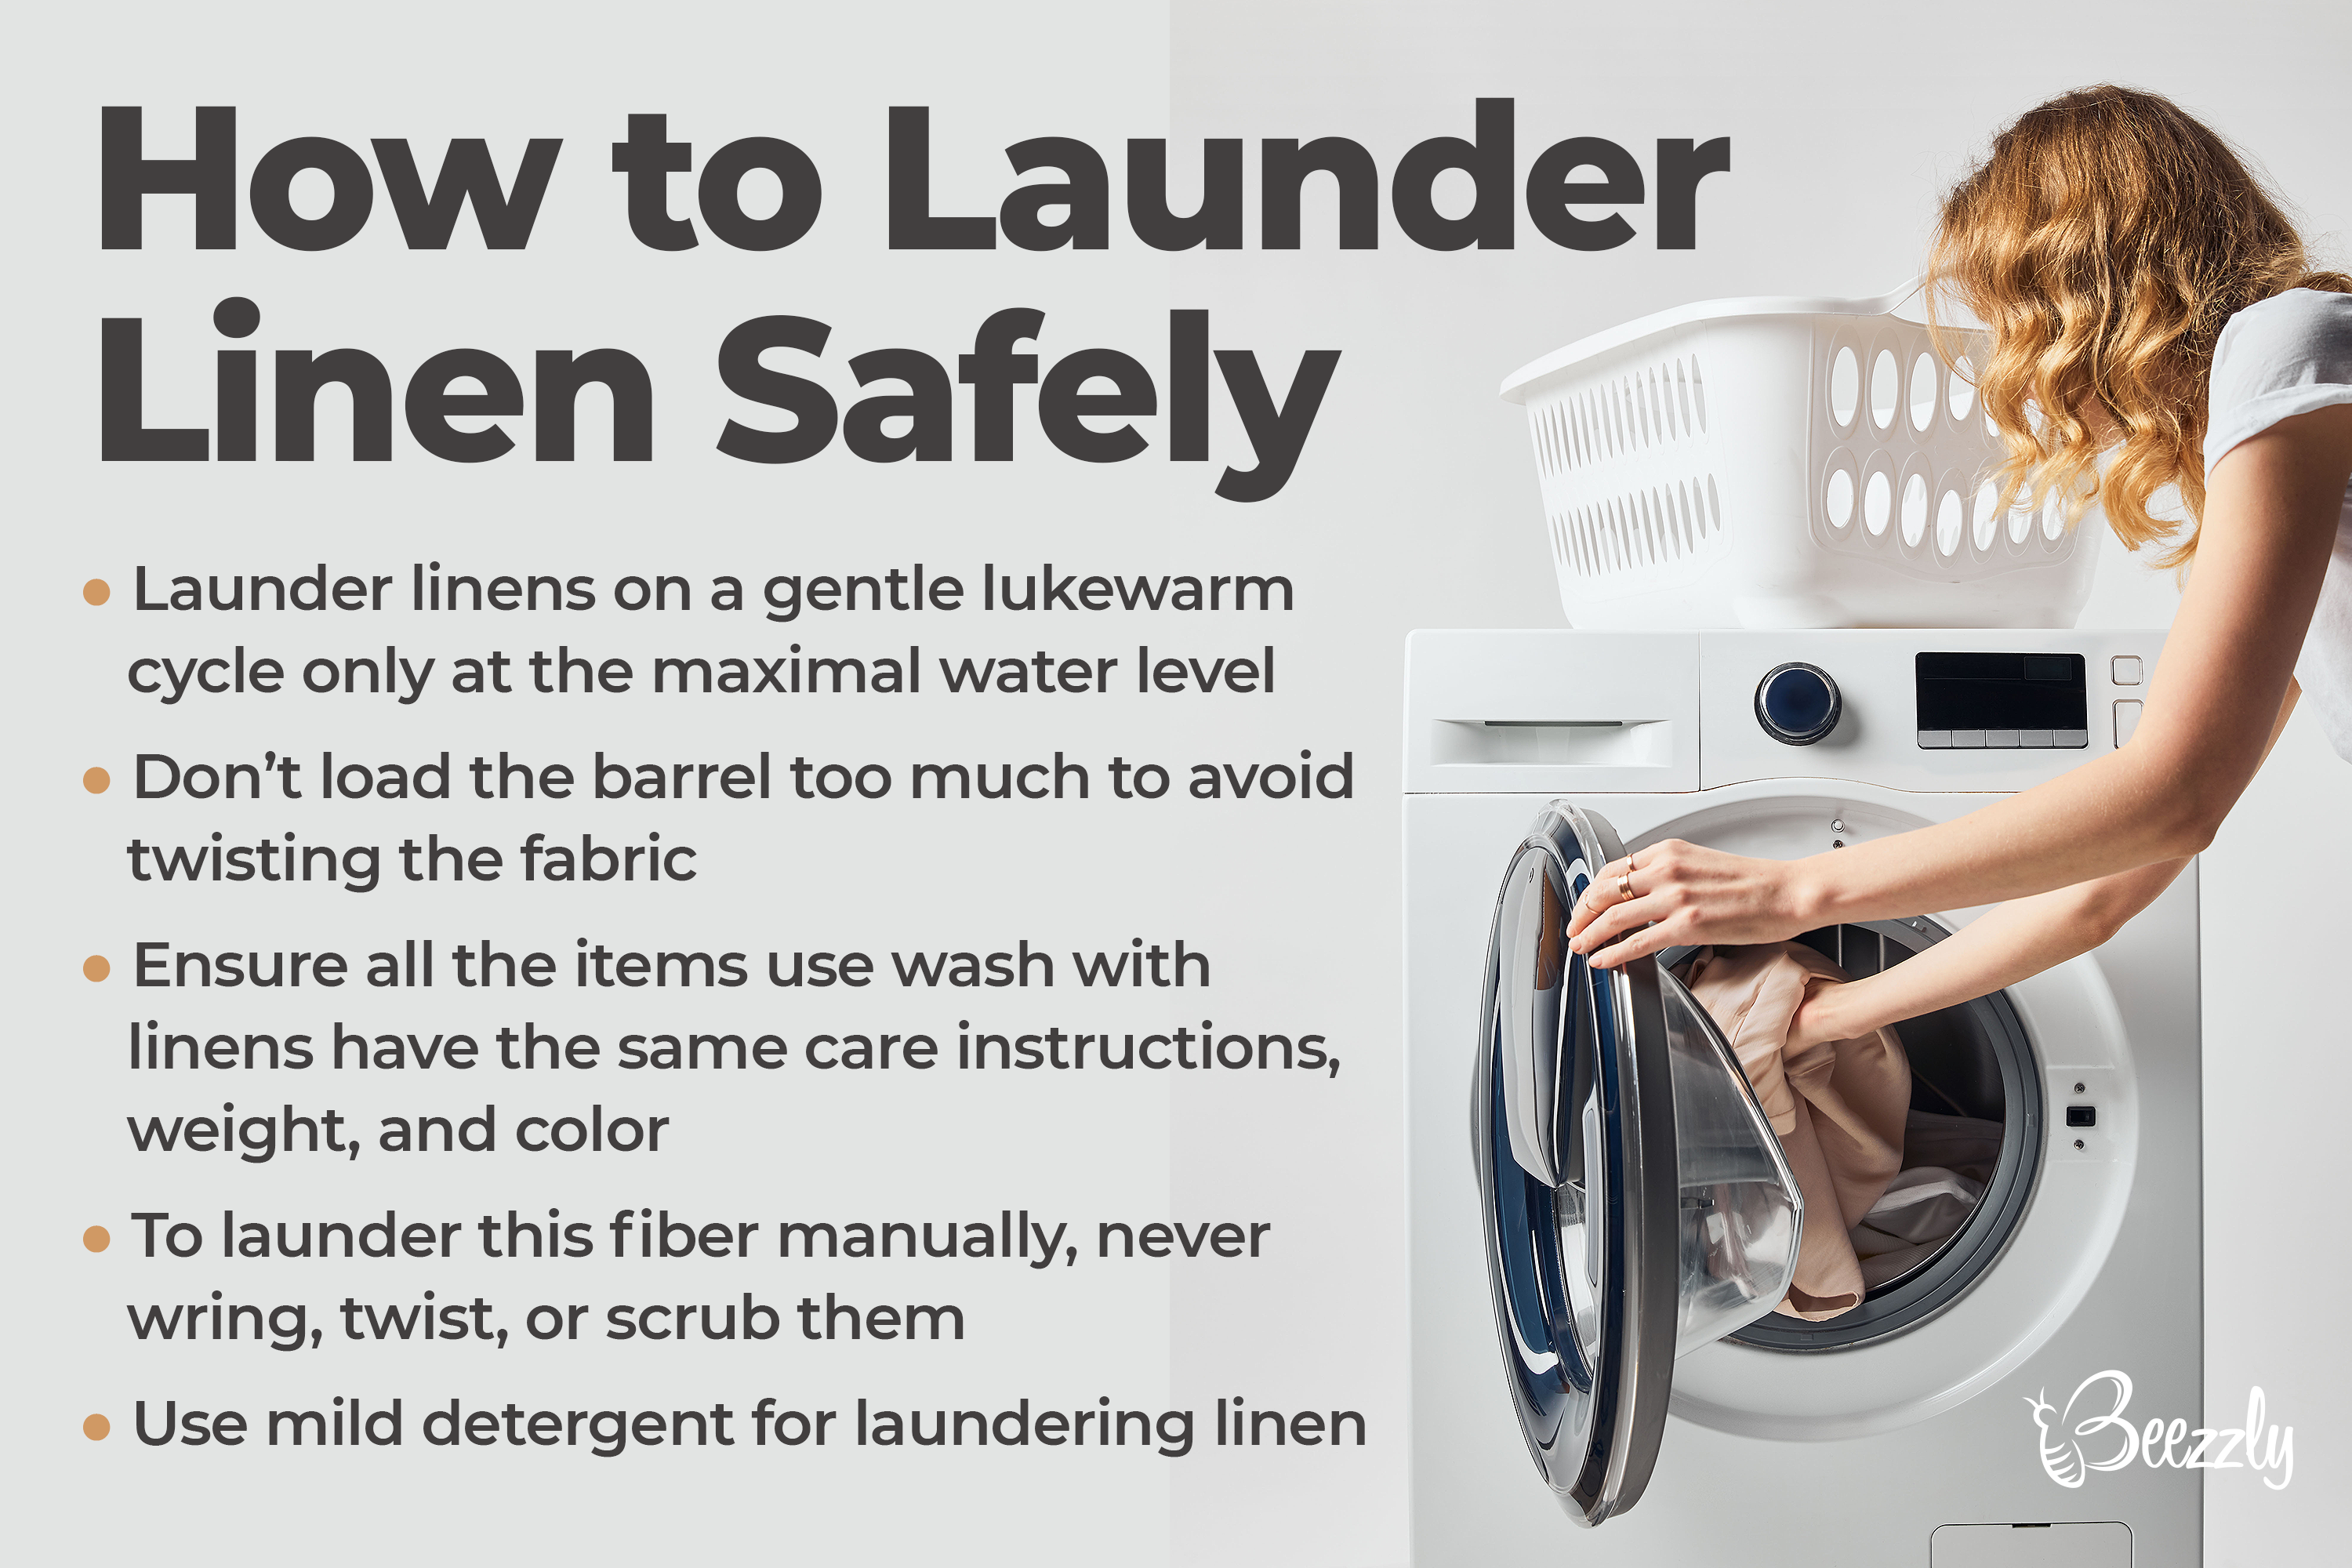 How to Launder Linen Safely